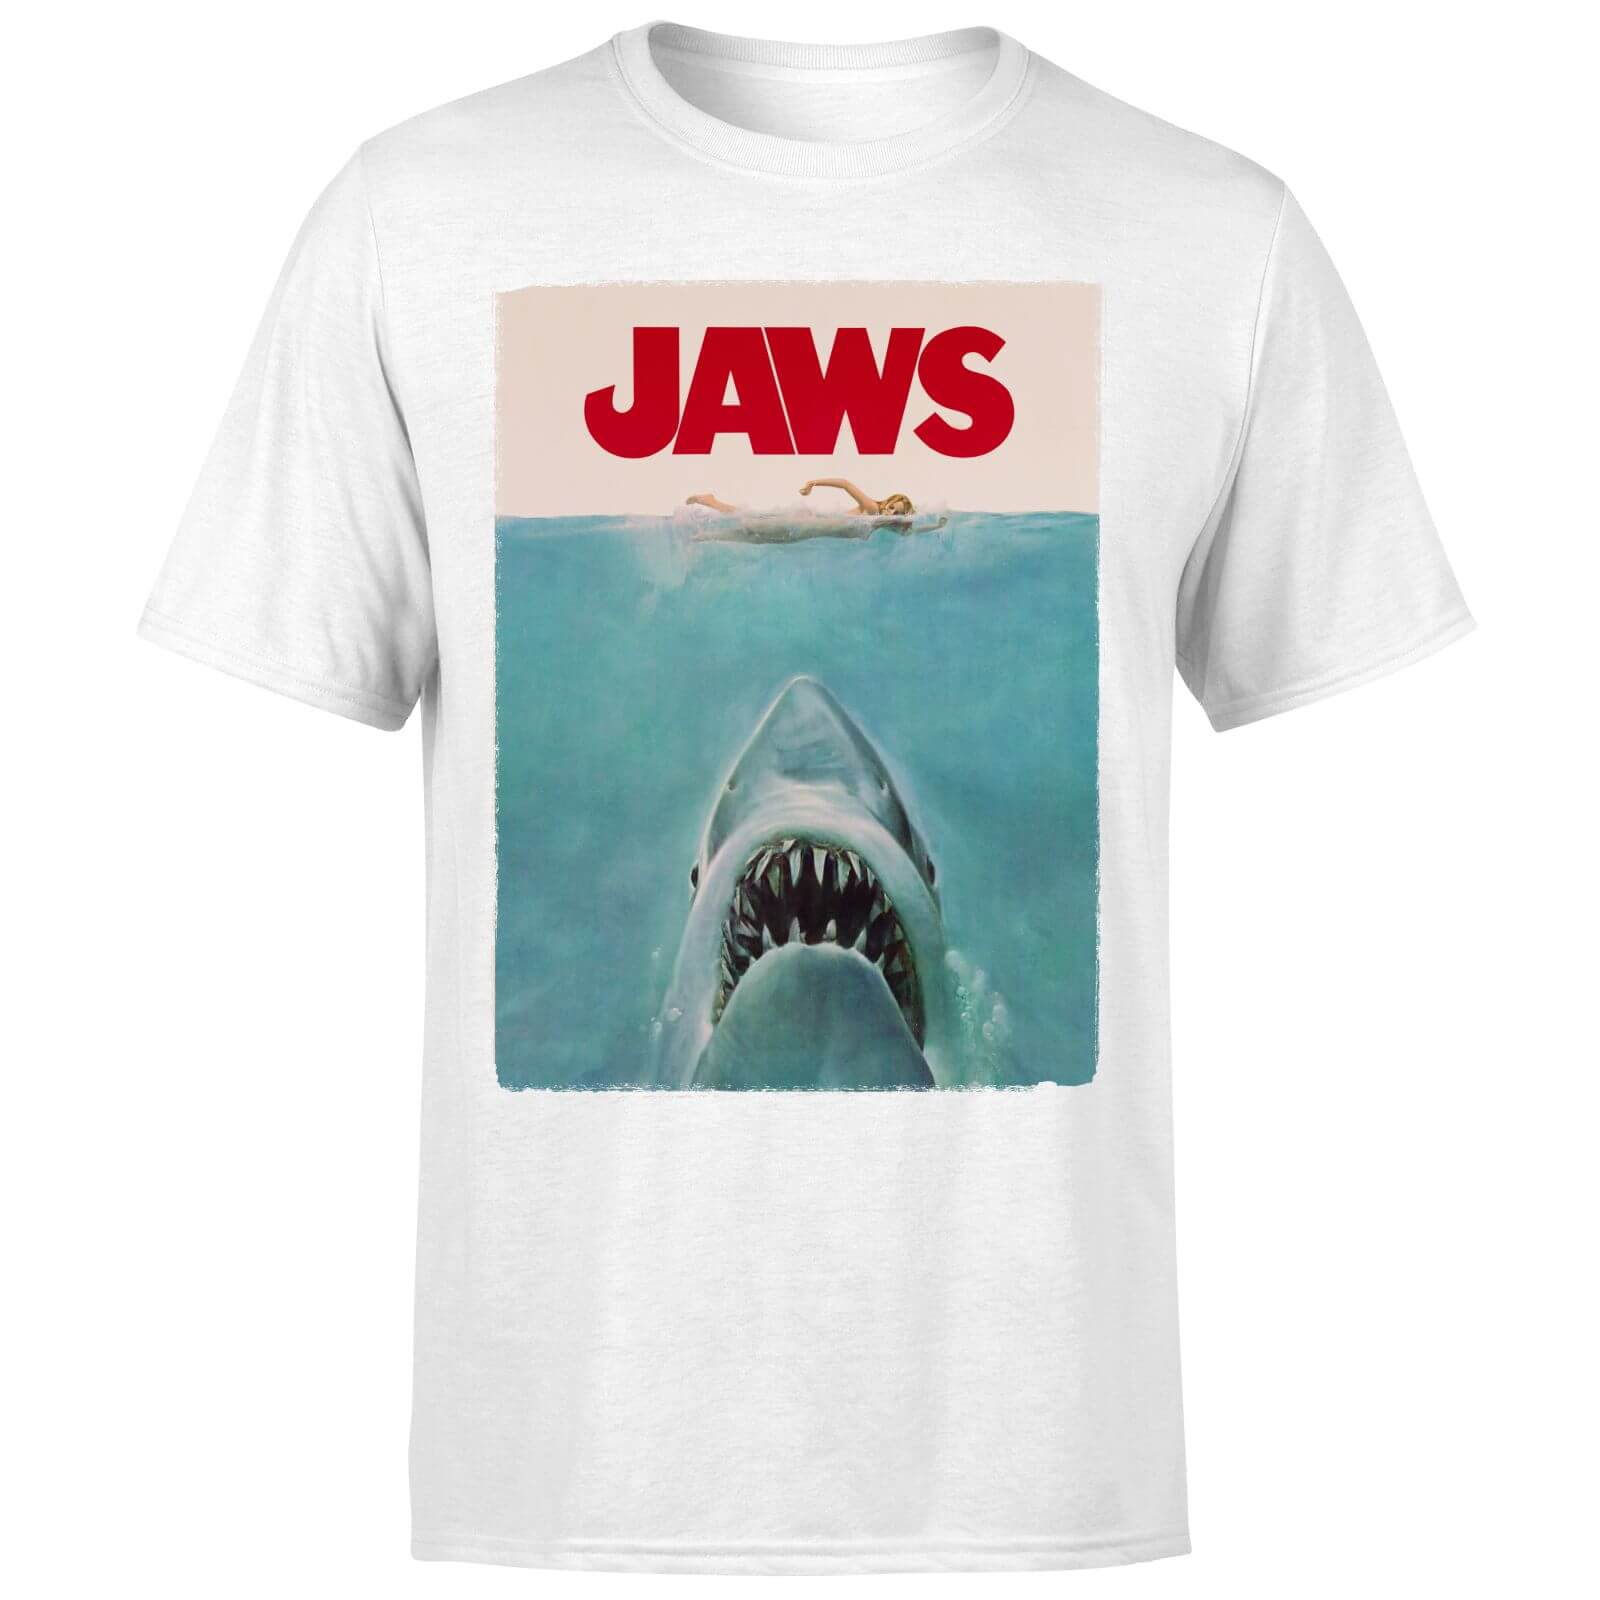 Jaws Classic Poster T-Shirt - White - S